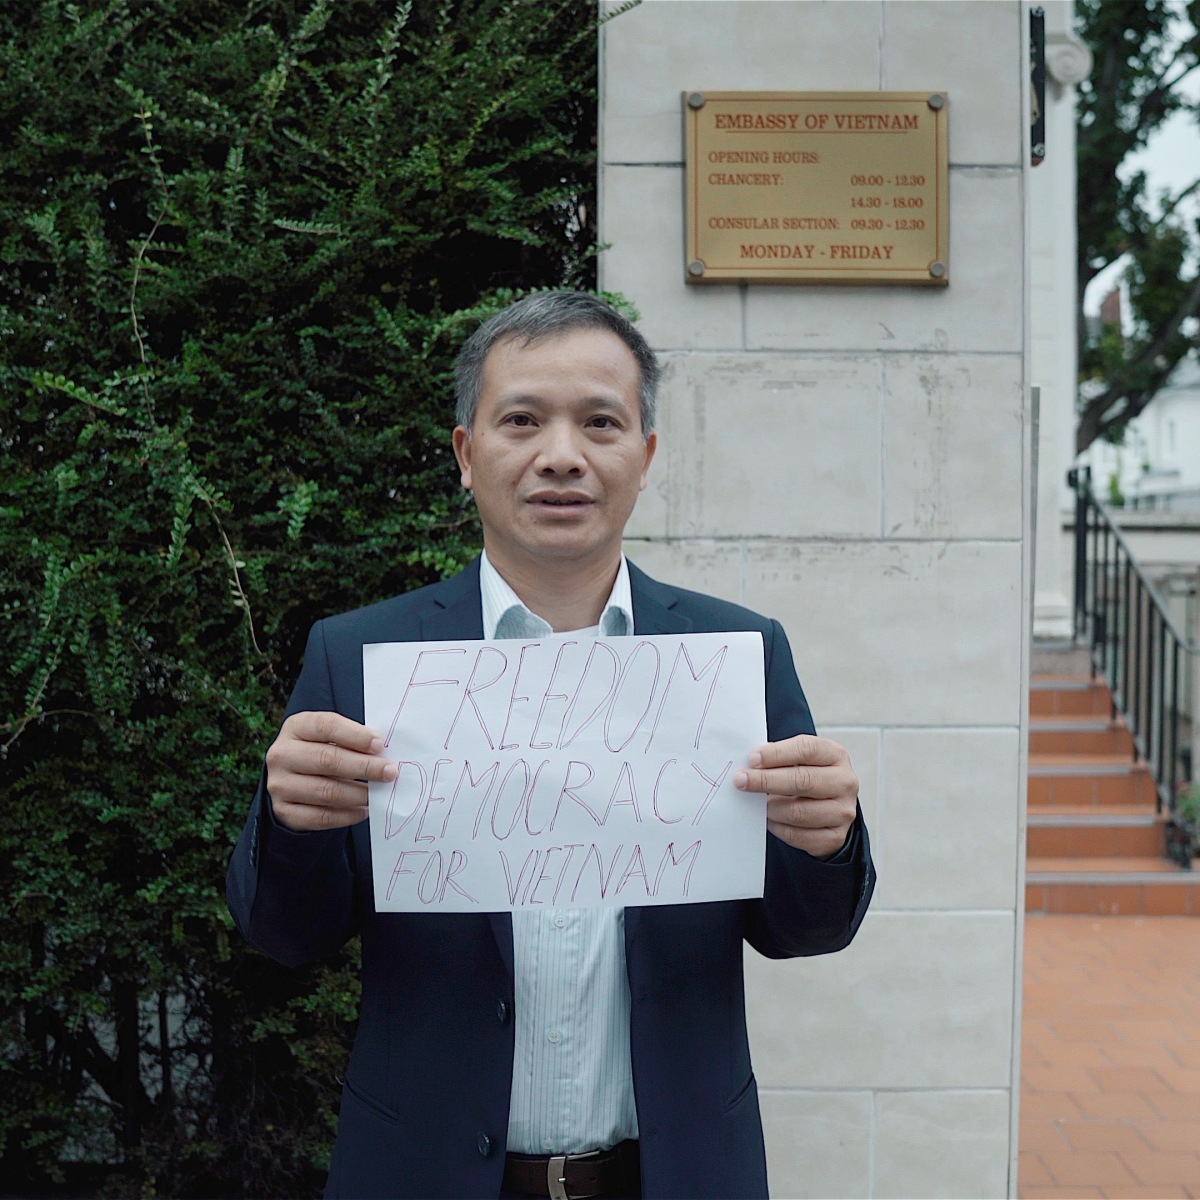 VIDEO: FoRB on the Frontlines in Vietnam, an interview with Nguyen Van Dai